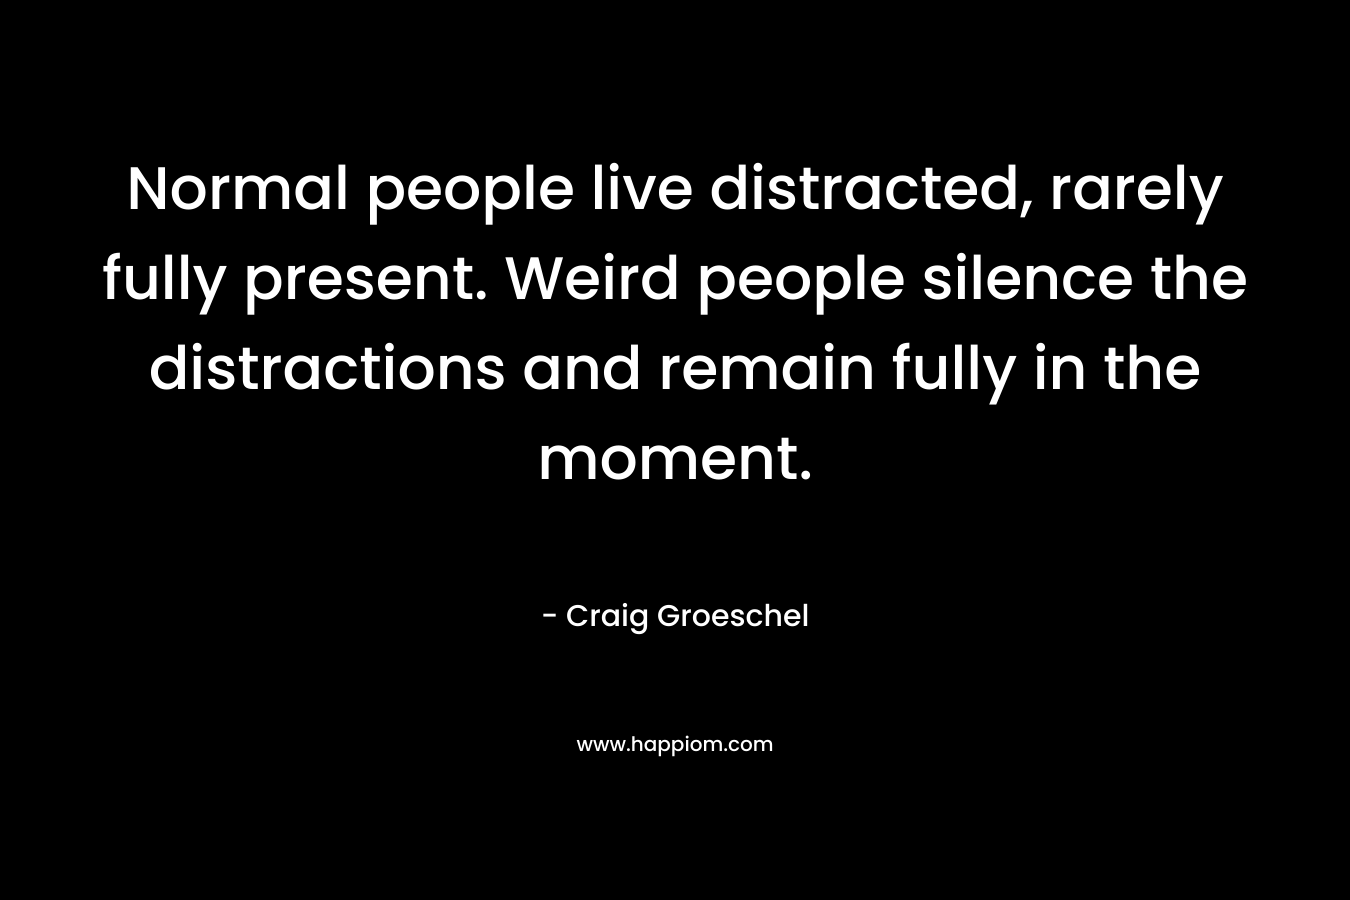 Normal people live distracted, rarely fully present. Weird people silence the distractions and remain fully in the moment.